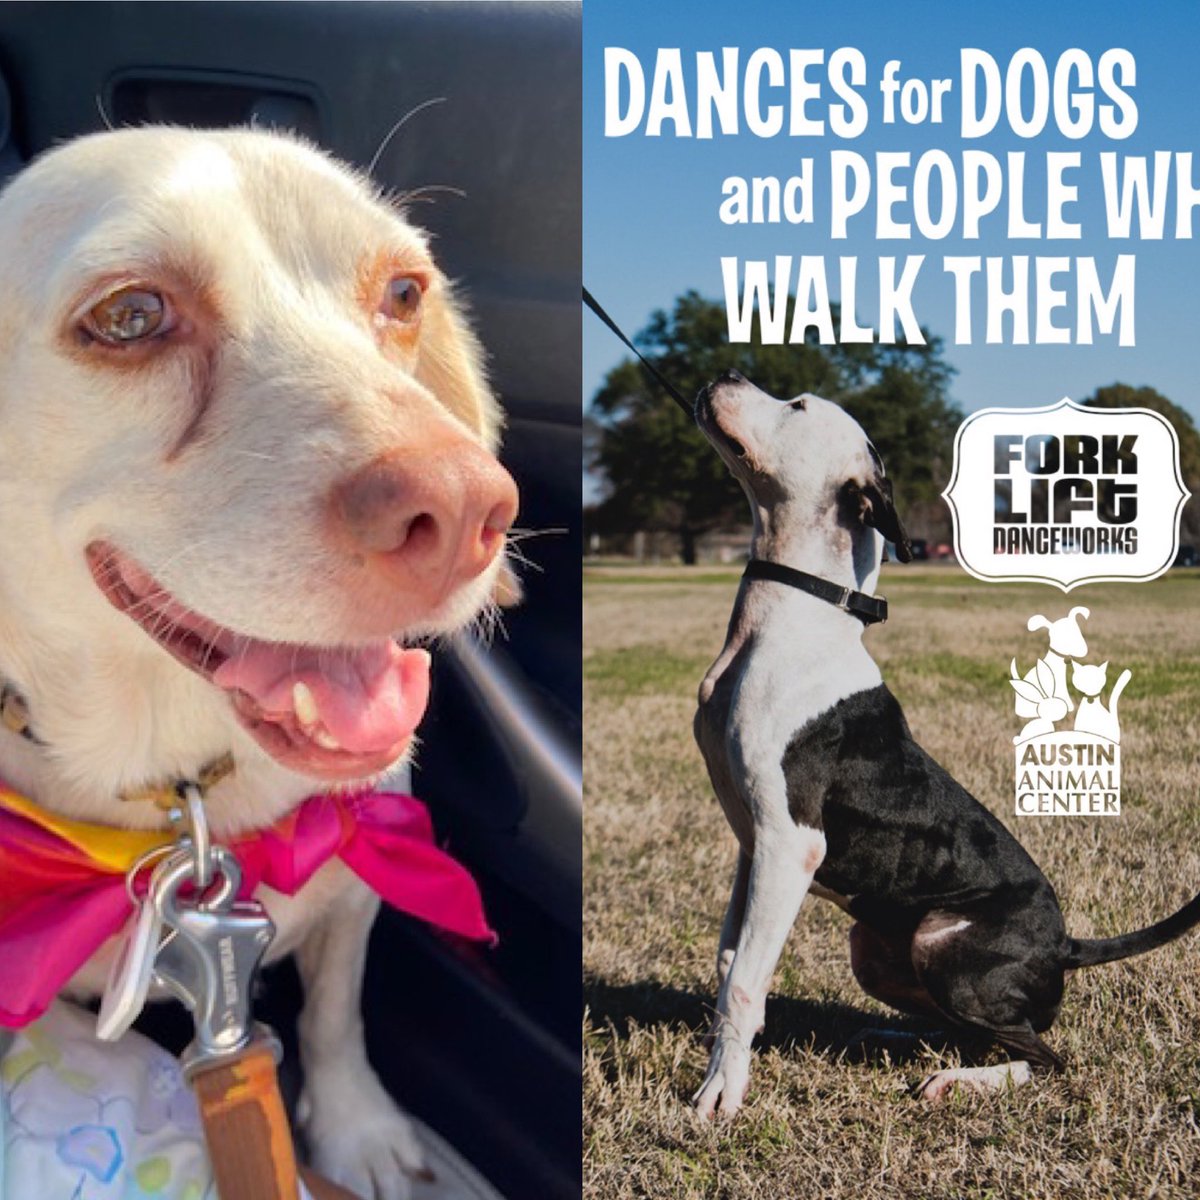 Ruthie and I will be among the “celebrity” performers at Dances with Dogs on Saturday at 2 pm at @austinanimals . Come join the fun! @ForkliftDance always puts on an amazing show 🐶.